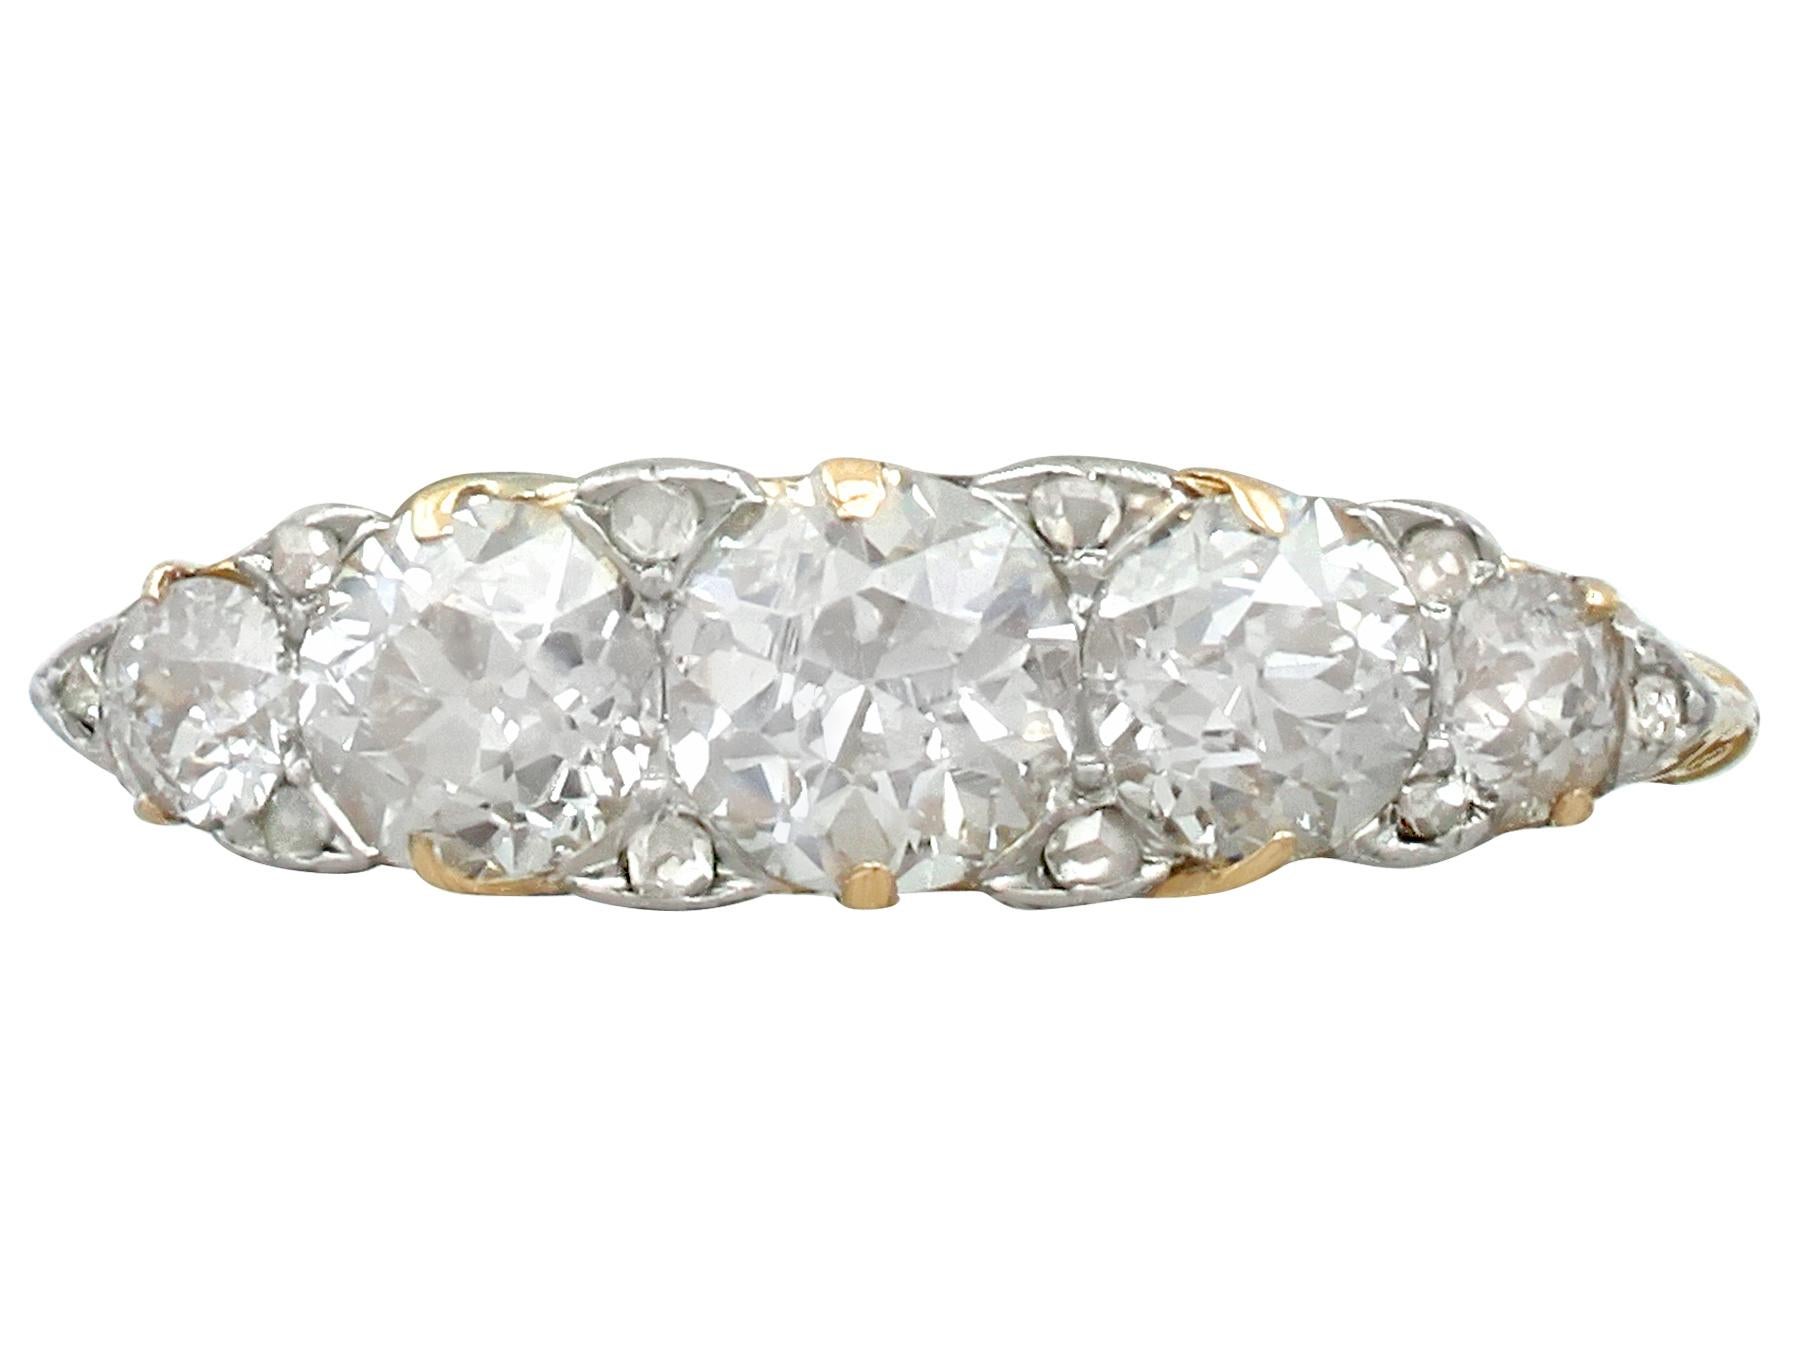 A stunning, fine and impressive antique 2.06 carat diamond and 18 karat yellow gold, 18 karat white gold set, five stone ring; part of our diverse collection of antique diamond rings

This stunning, fine and impressive five stone diamond ring has